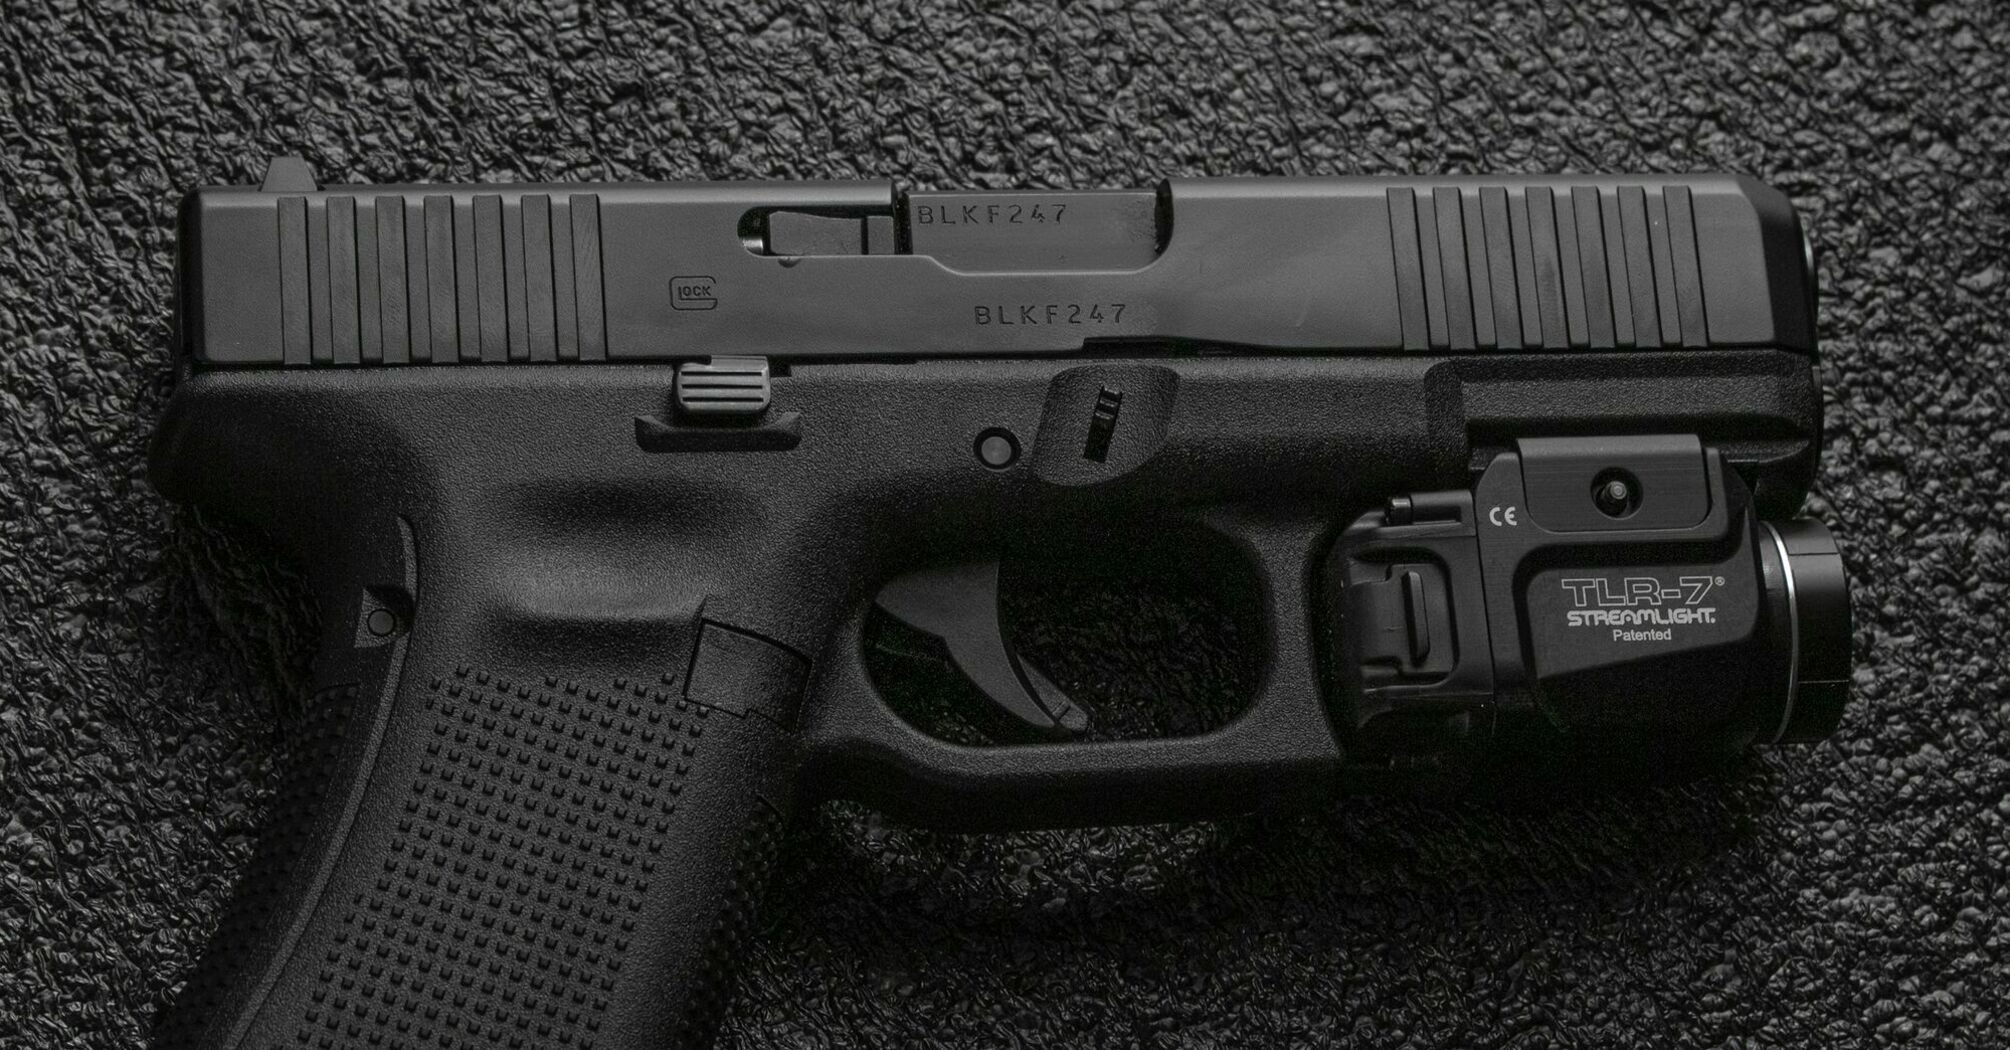 A close-up image of a handgun resting on a textured surface